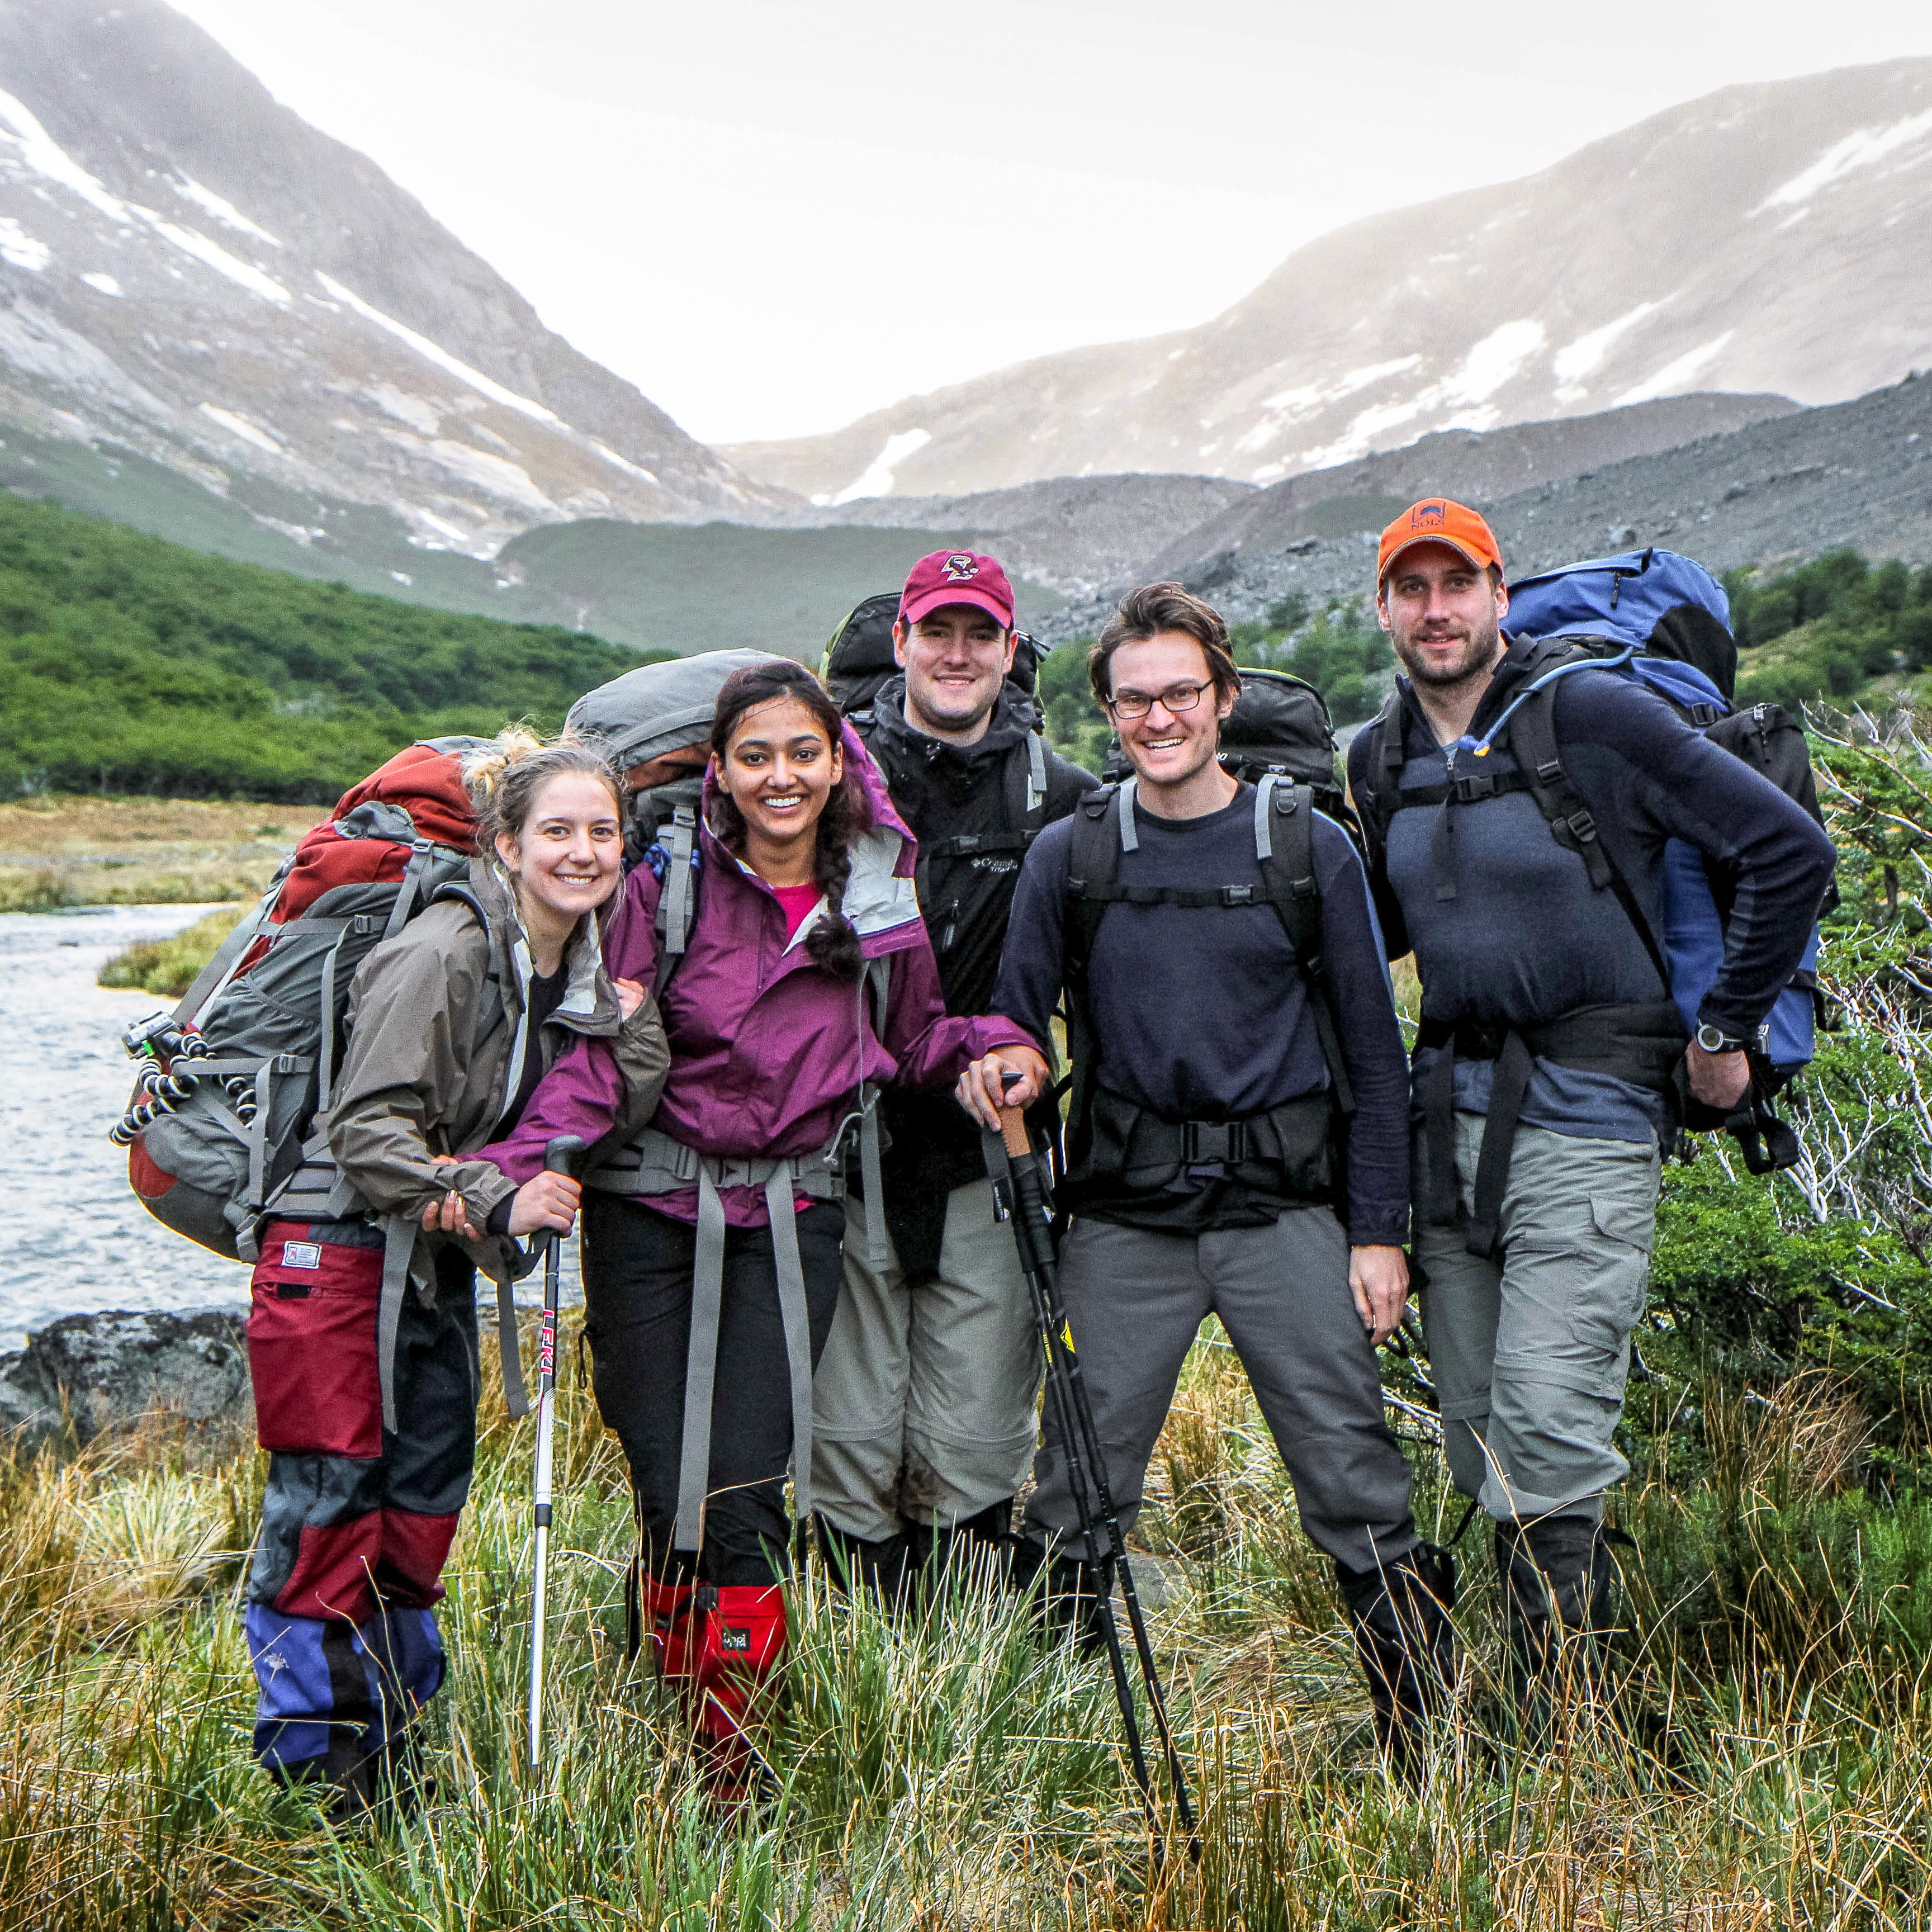 Group of five NOLS gap year students with hiking and backpacking gear among a beautiful landscape.